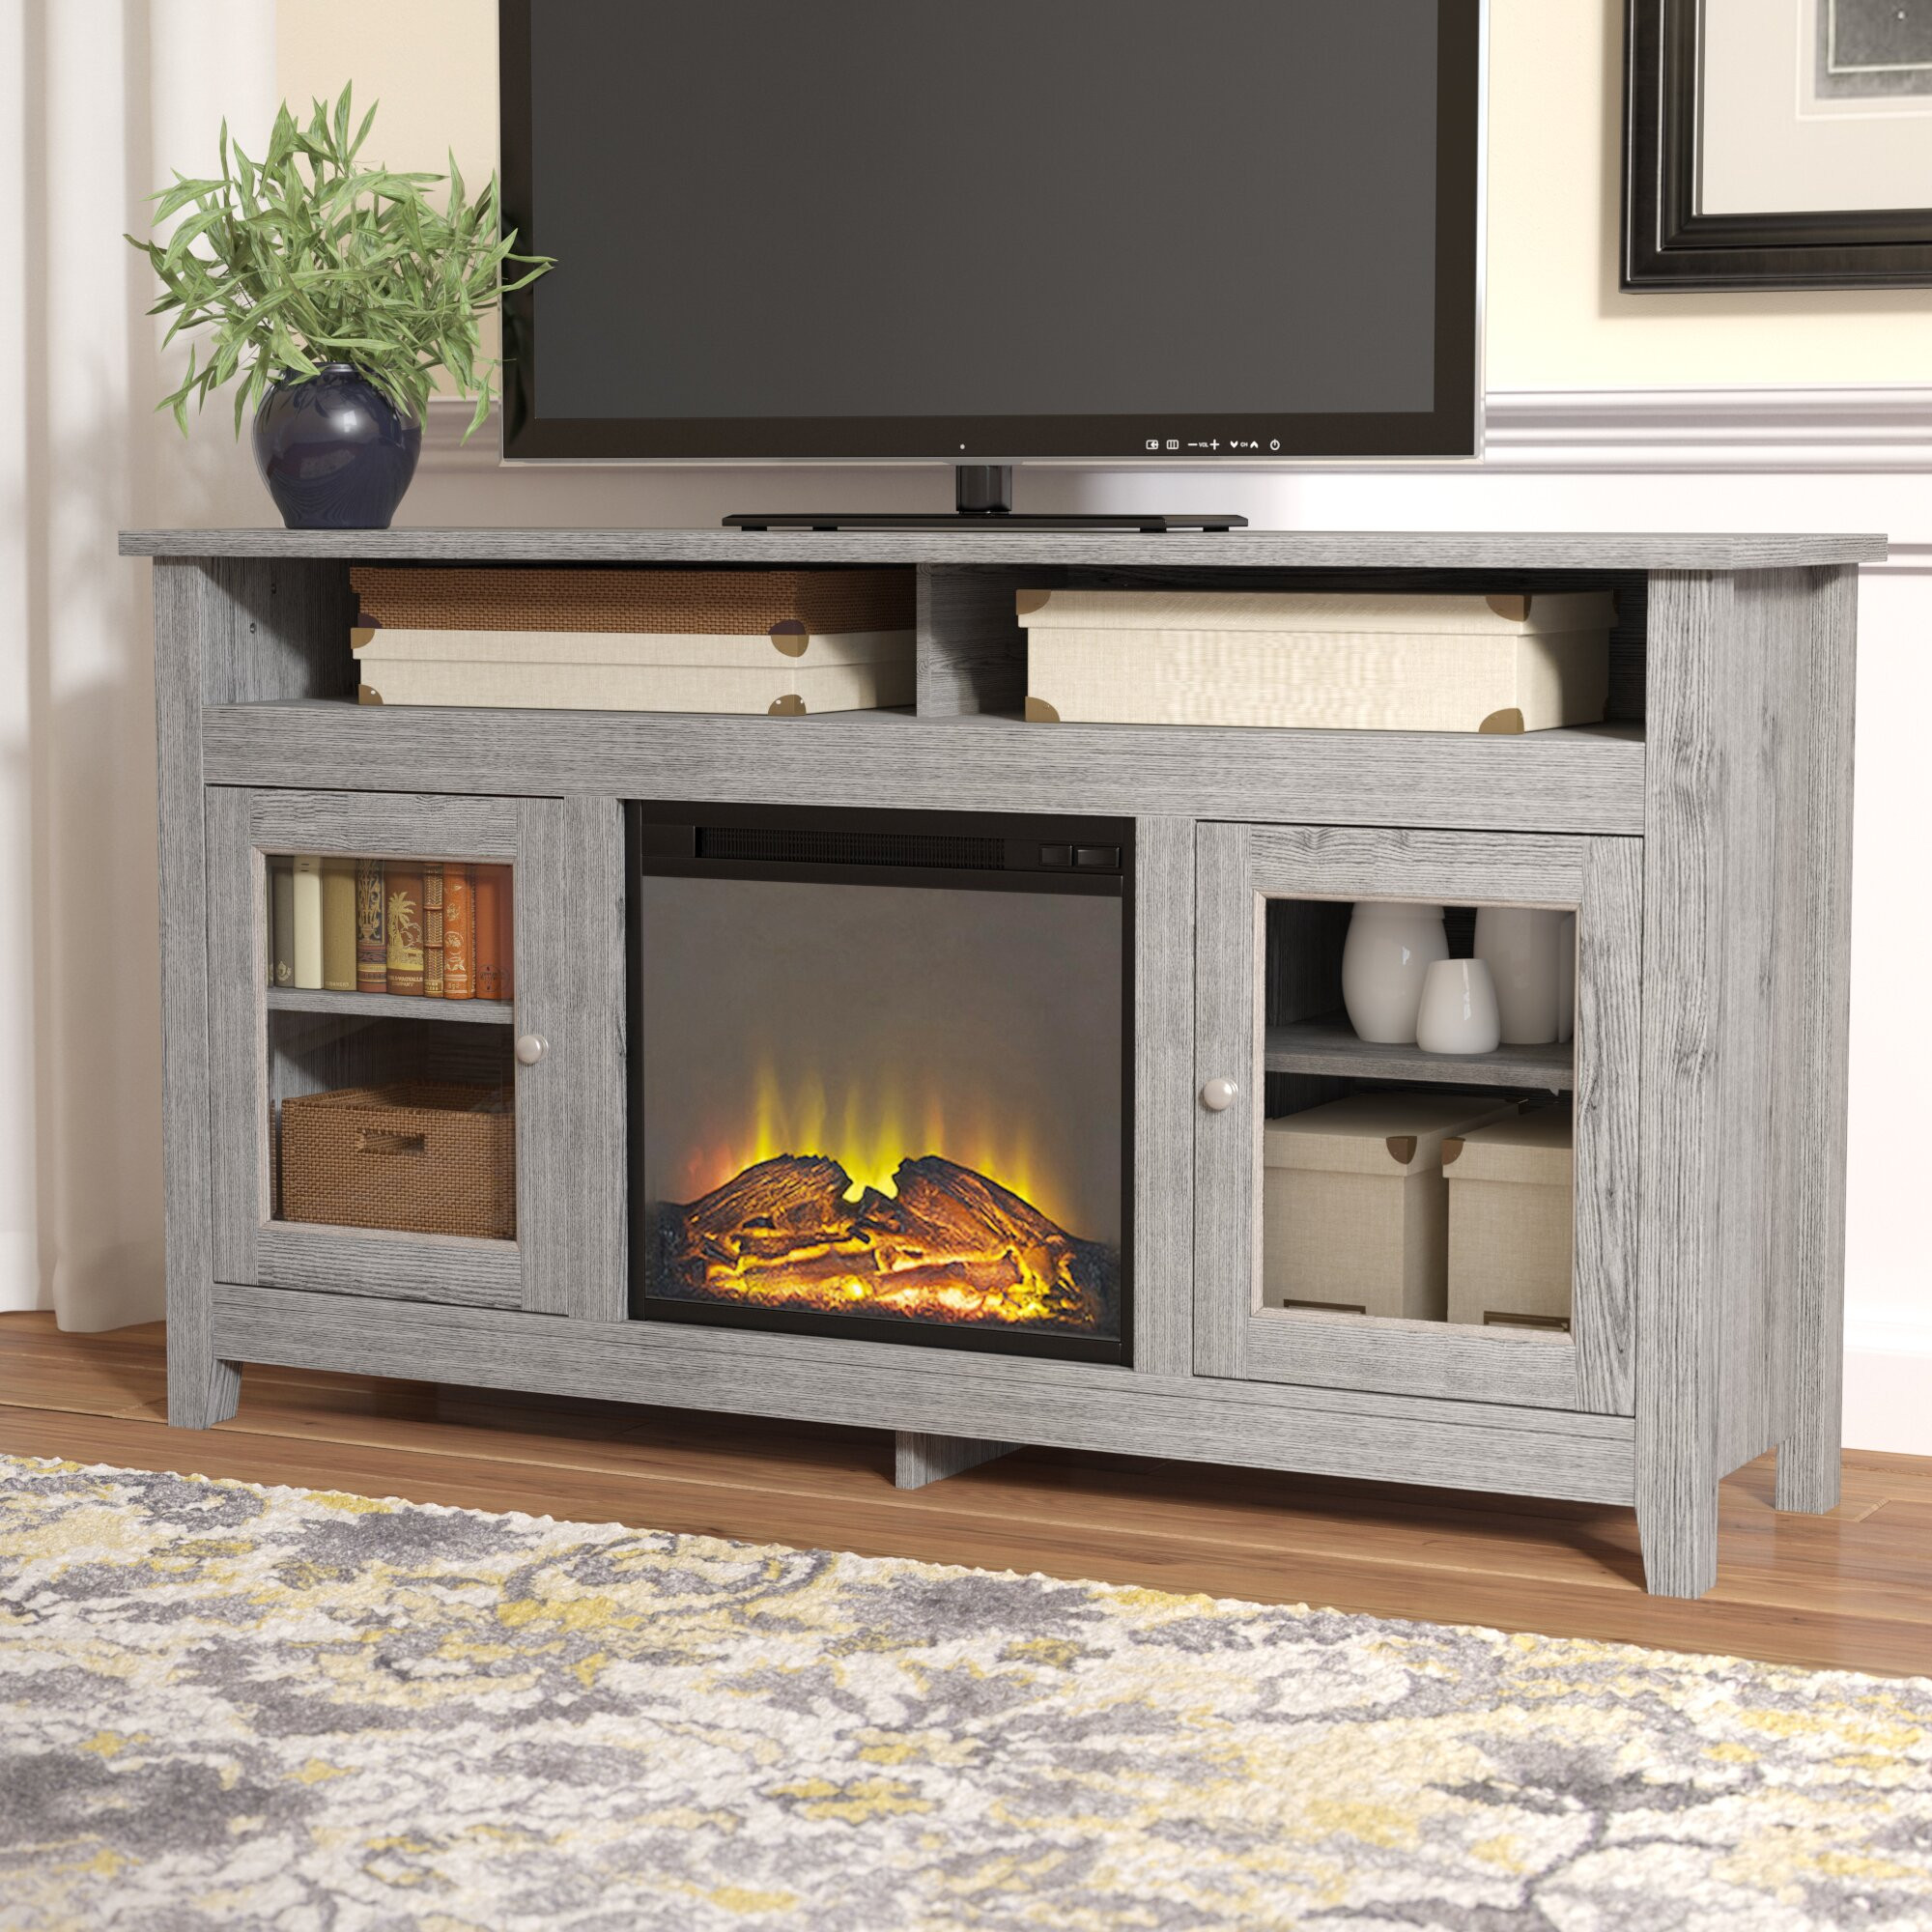 Small Electric Fireplace Tv Stand
 Darby Home Co Isabel Highboy TV Stand with Electric